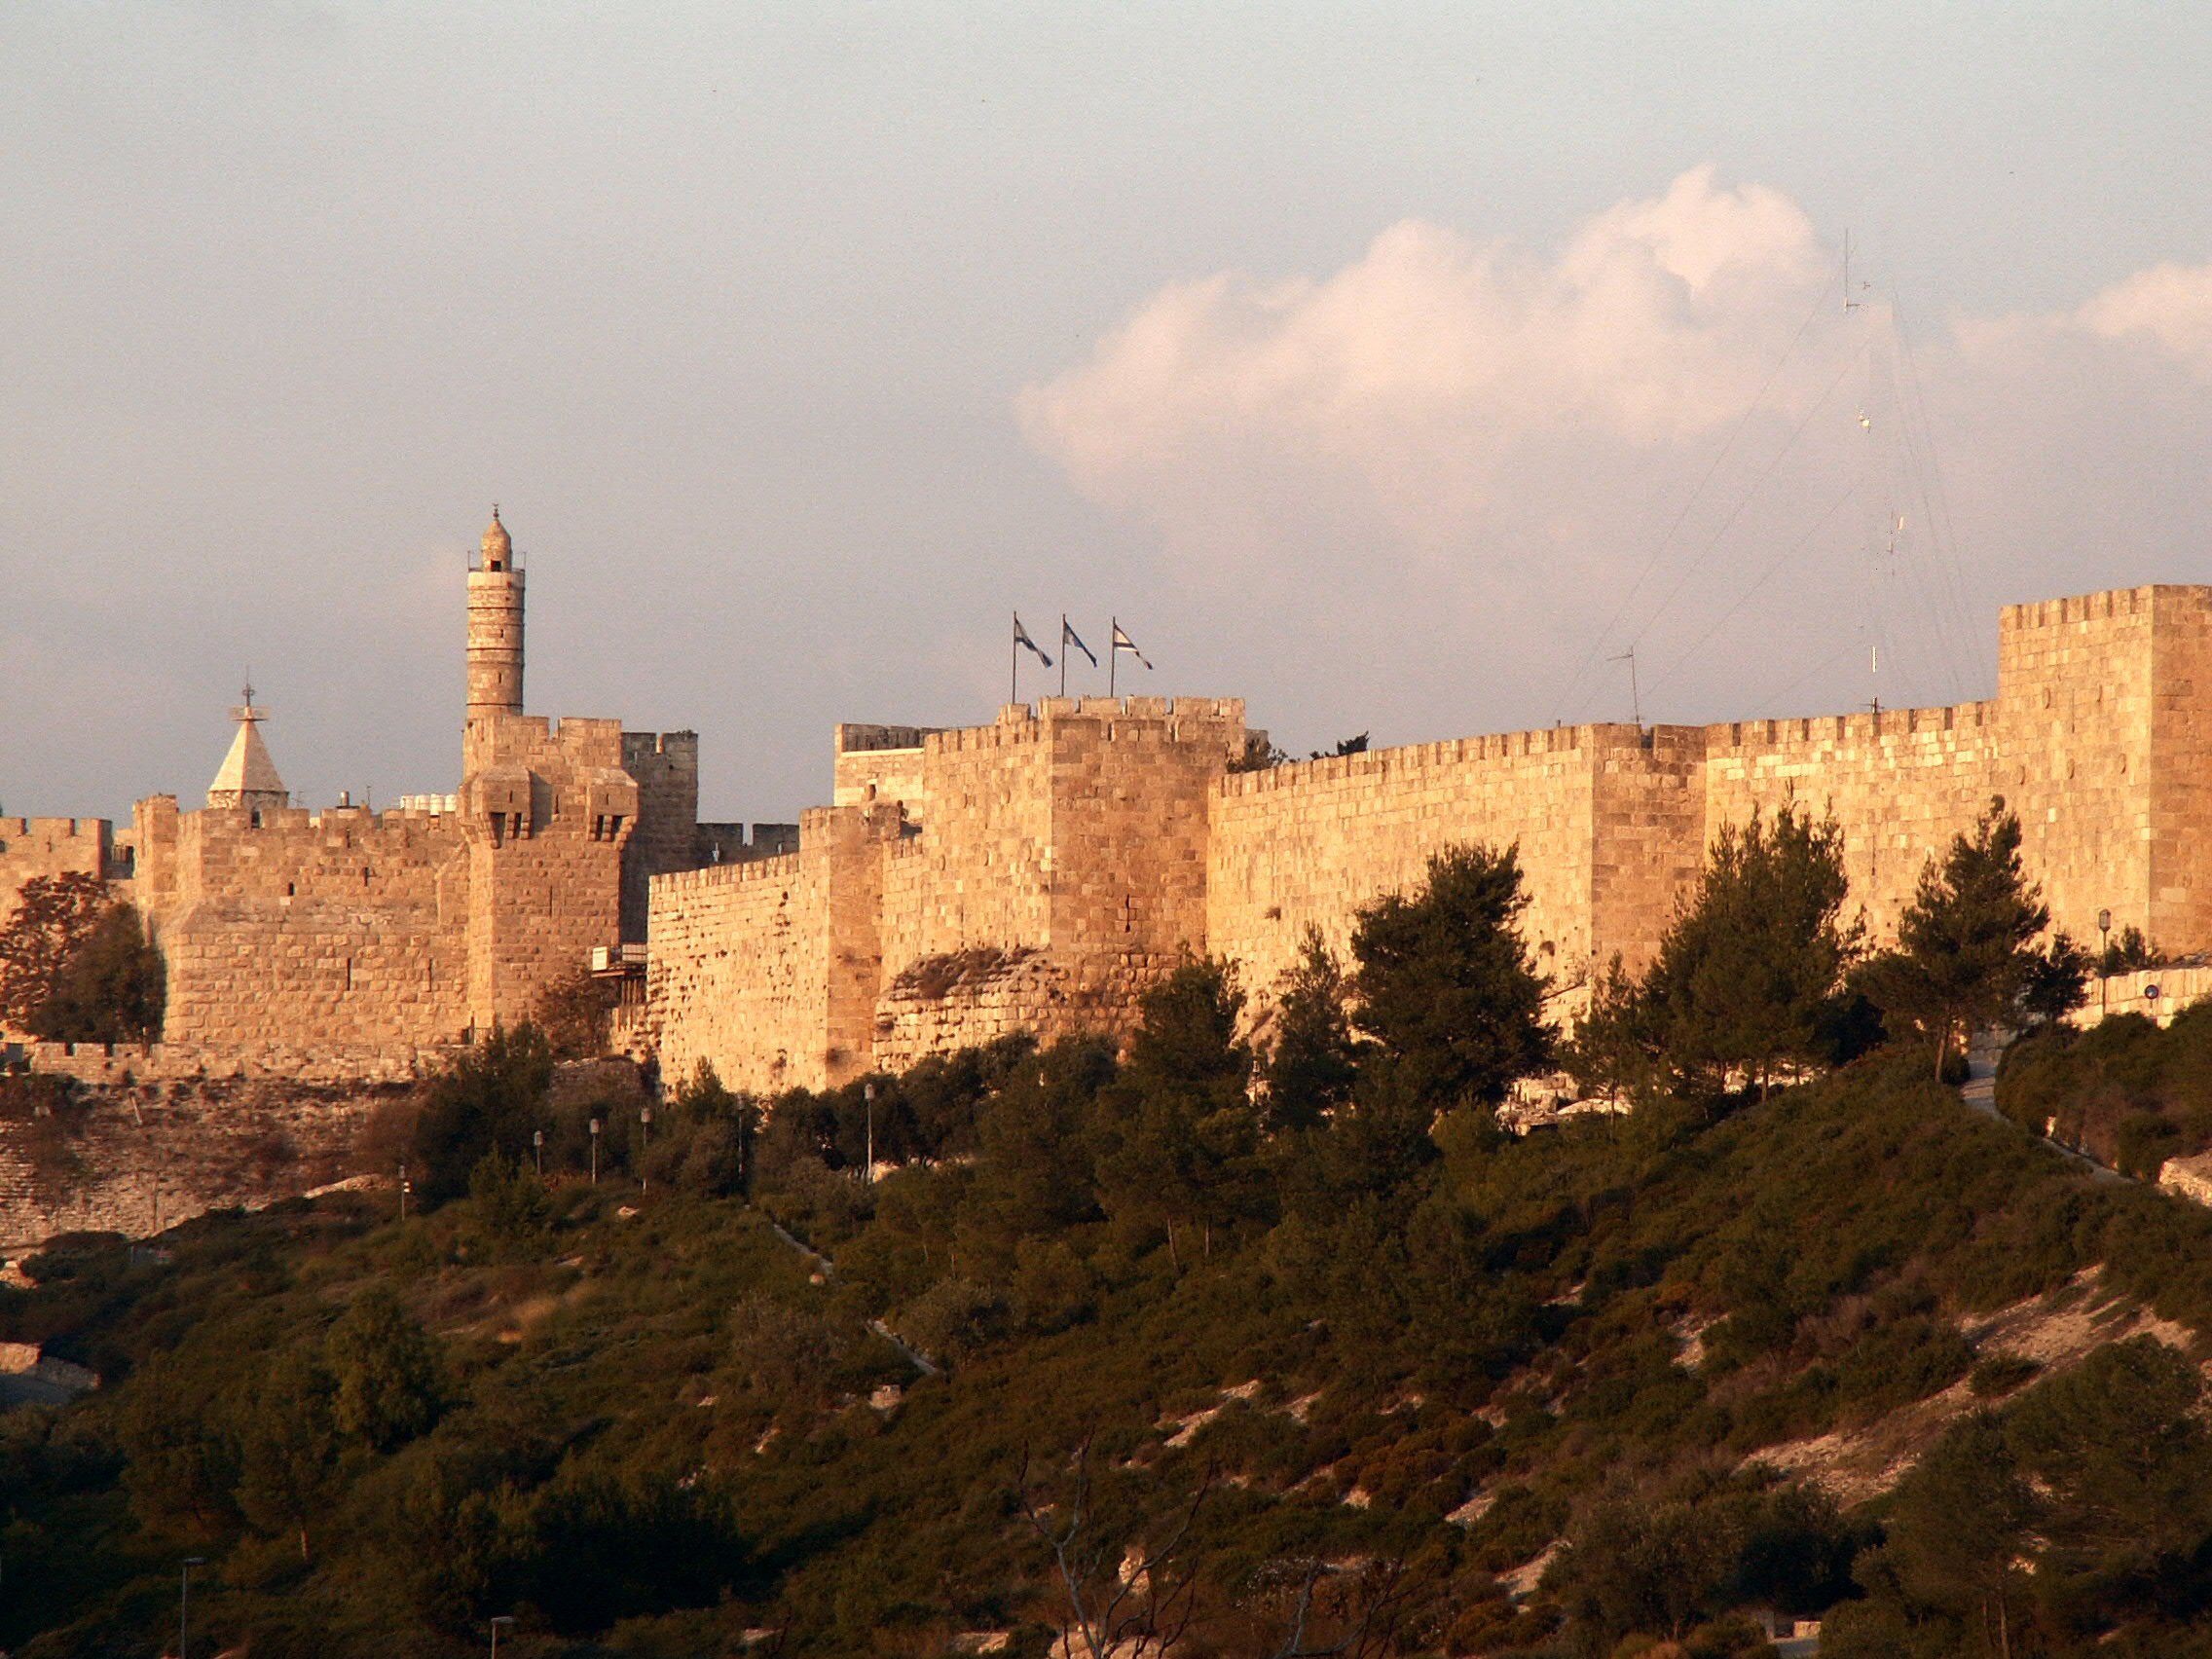 Ottoman Walls surrounding the Old City in Jerusalem